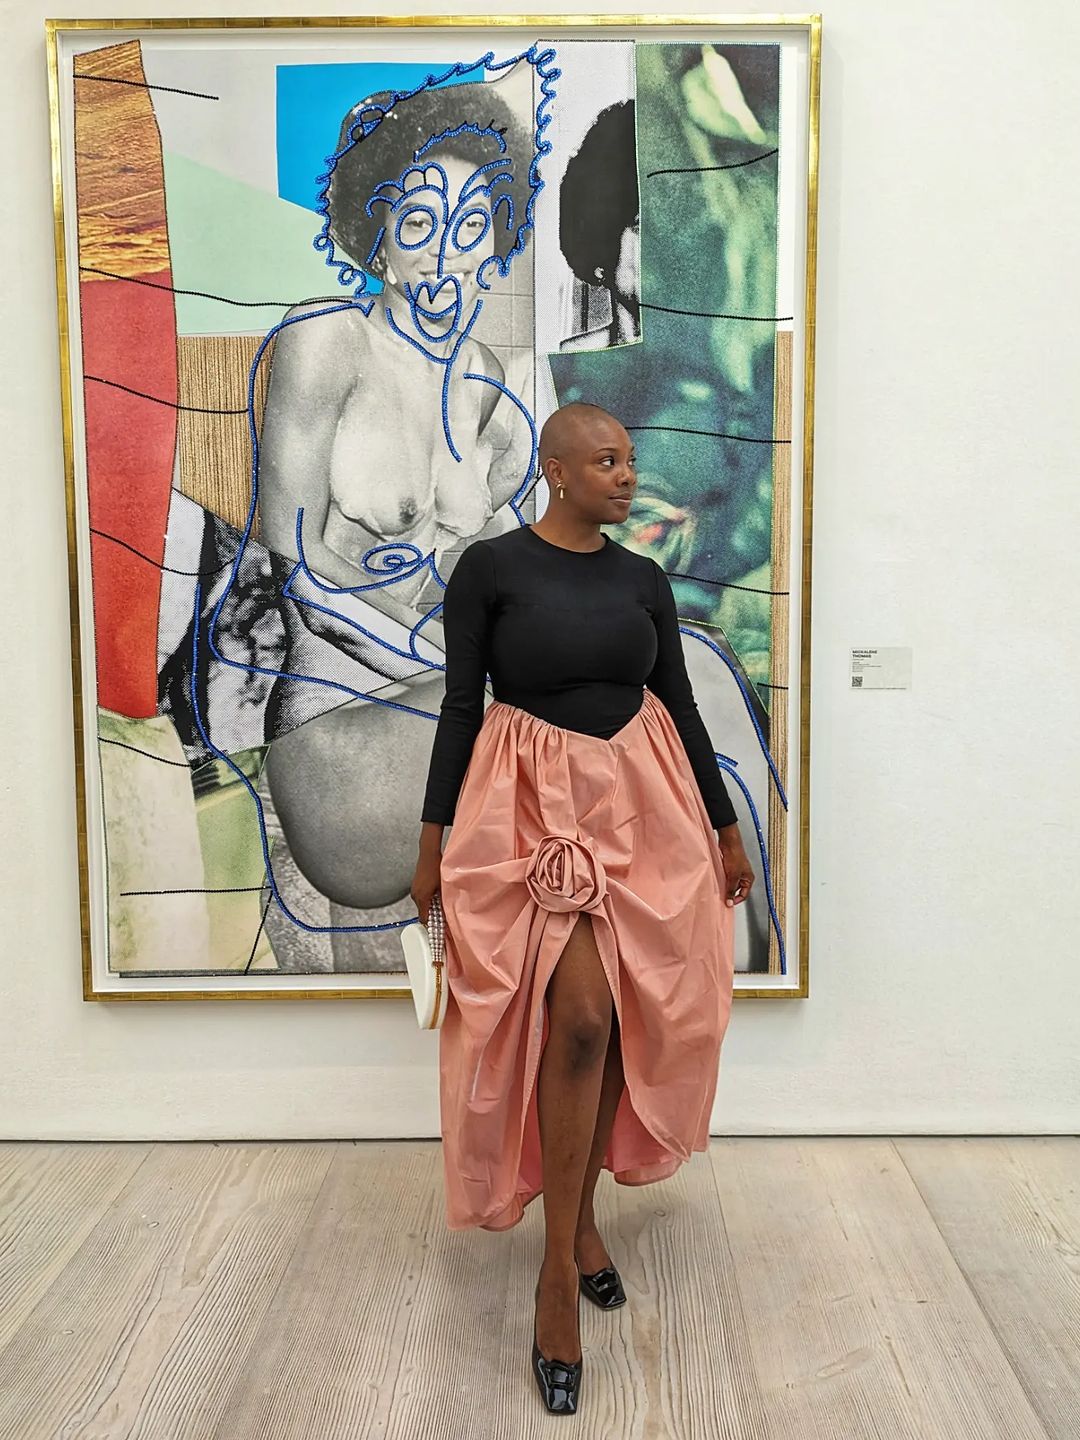 Yomi Adegoke attends a gallery opening in a black and pink dress